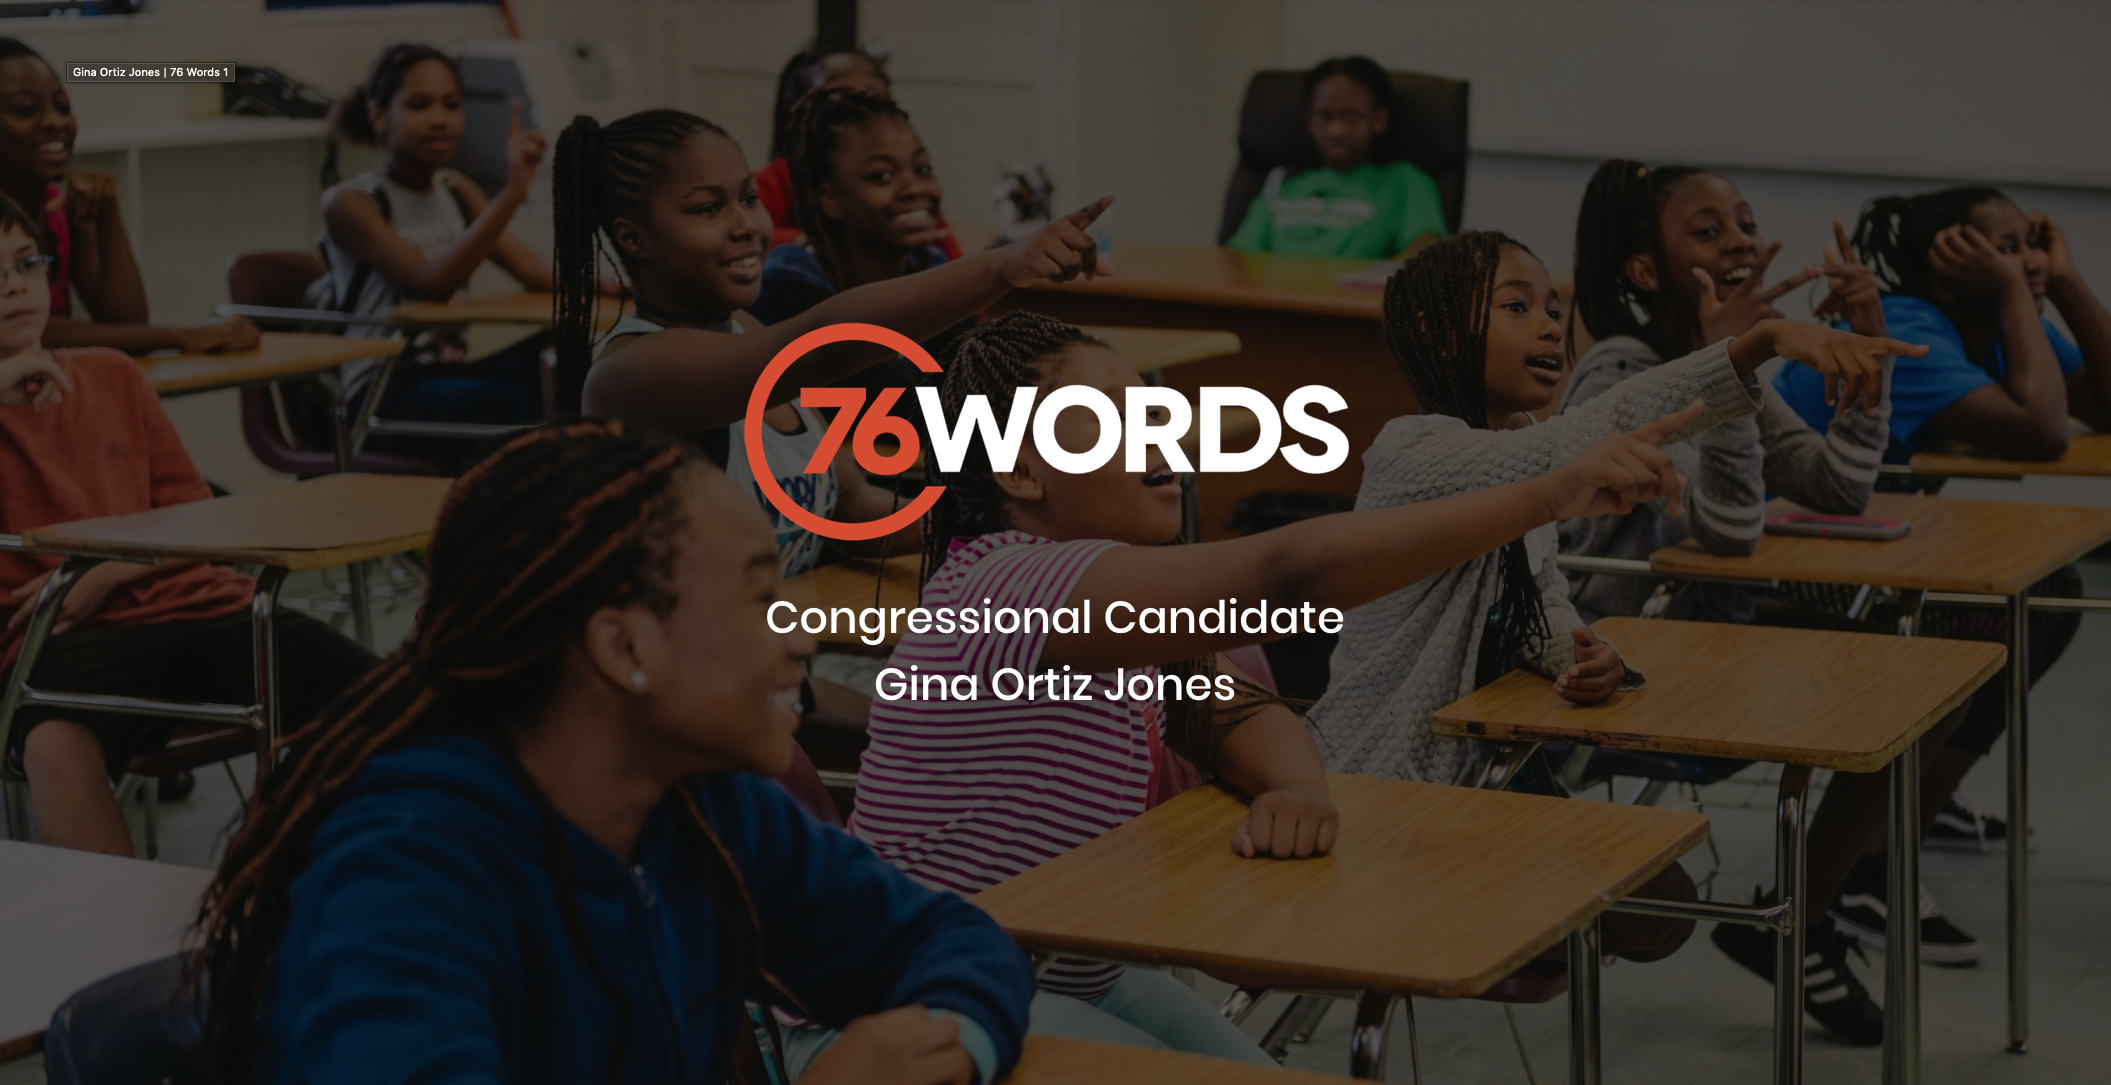 White and orange 76 Words Congressional Candidate Gina Ortiz Jones logo with a dimmed background showing a group of young students in a classroom